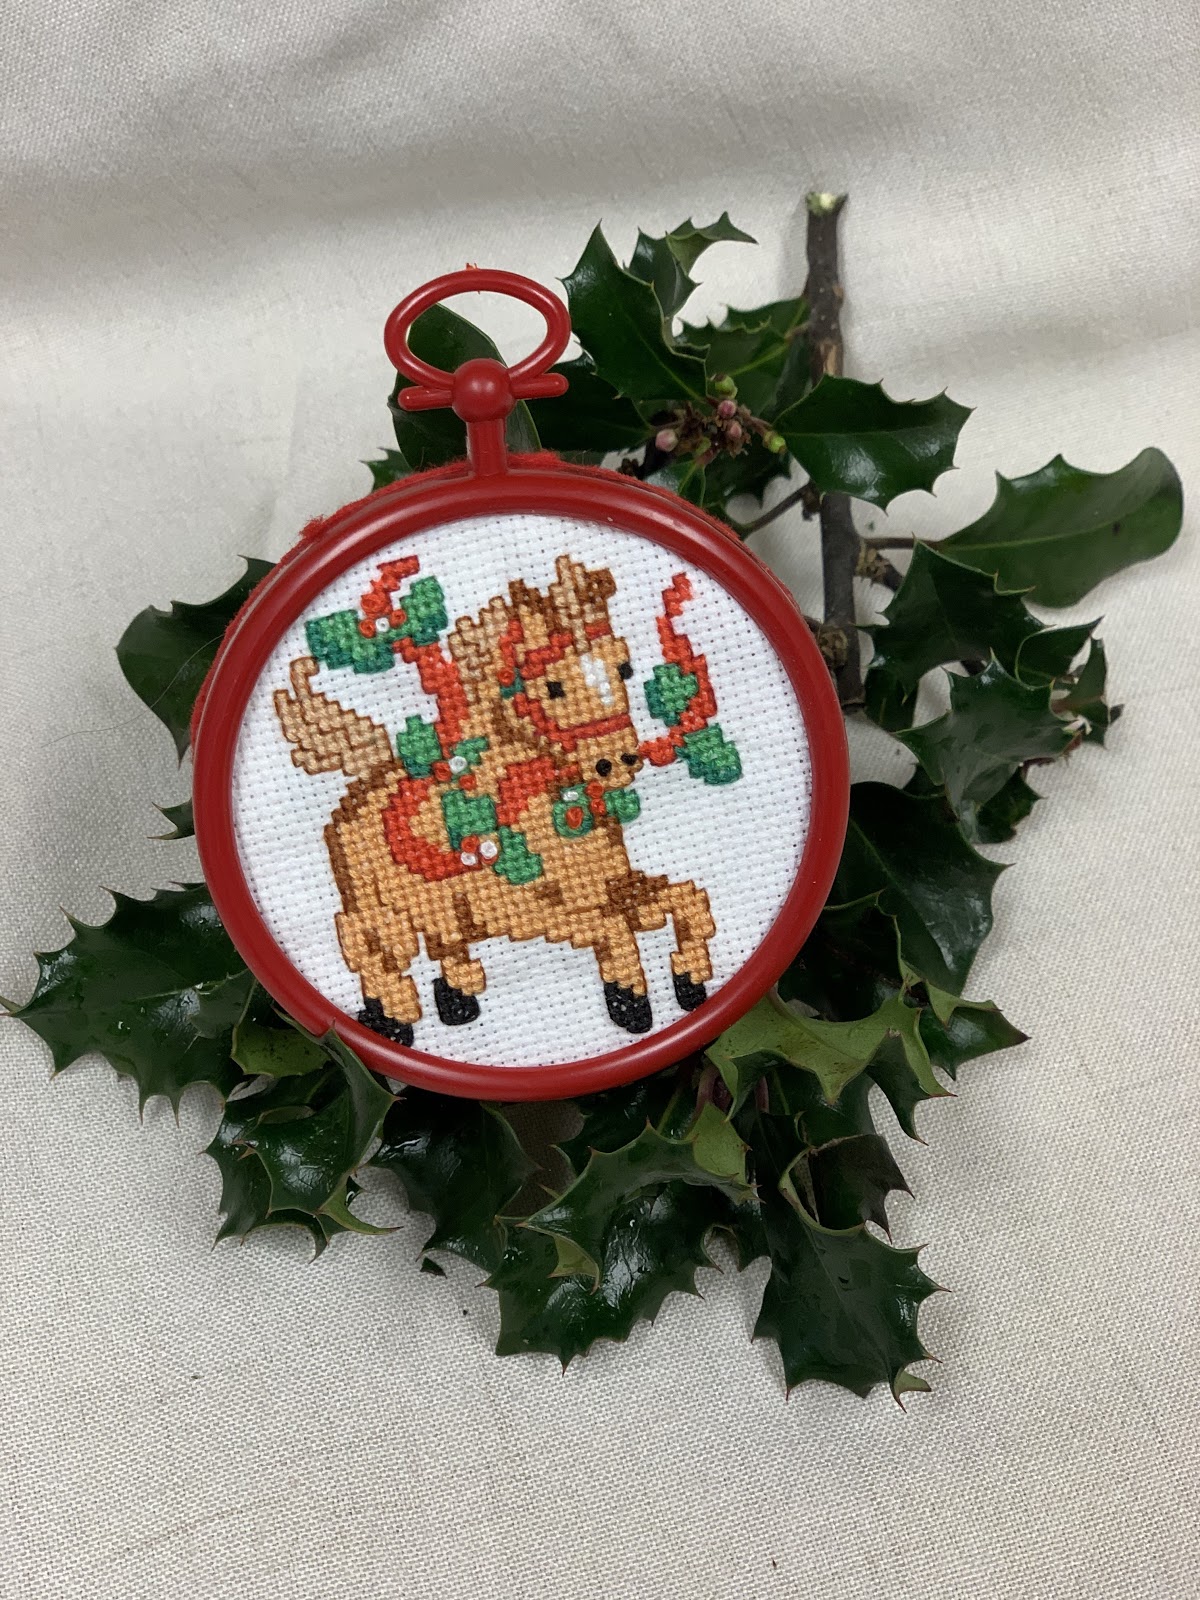 Counted Cross Stitch Ornament - Reindeer - St. Peter's Lutheran